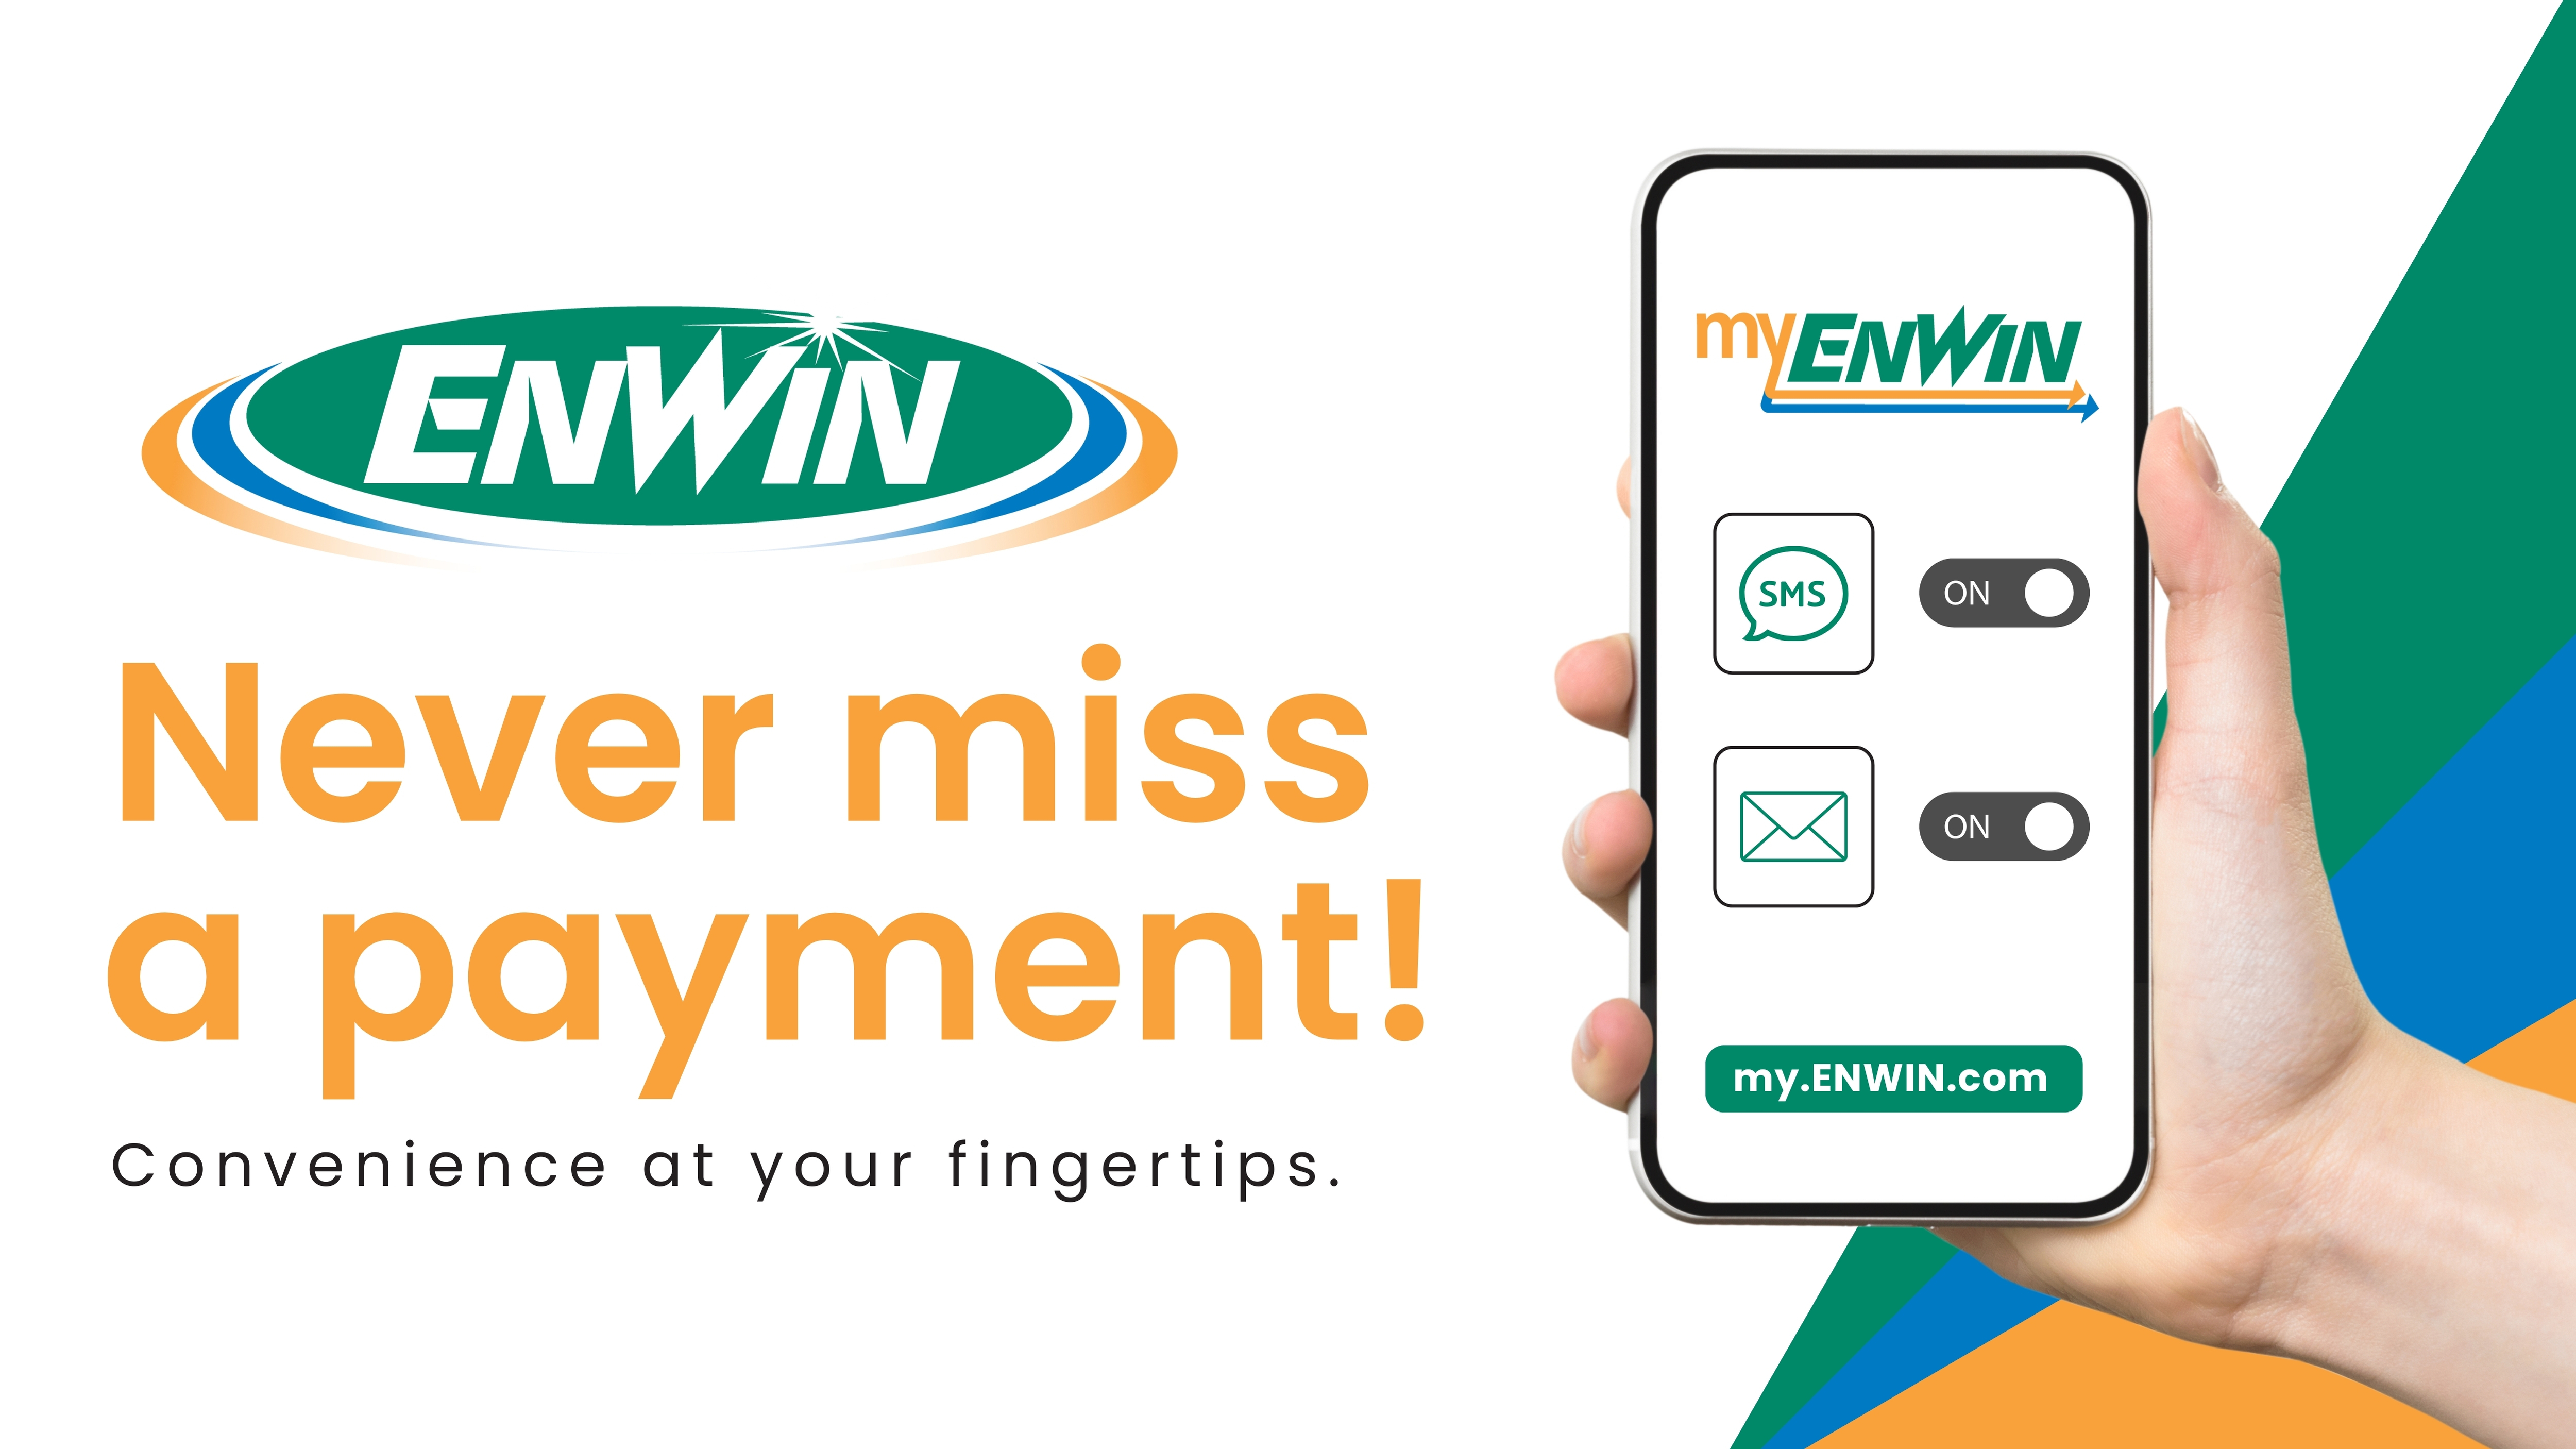 Never miss a payment. Convenience at your fingertips. ENWIN Graphic ad